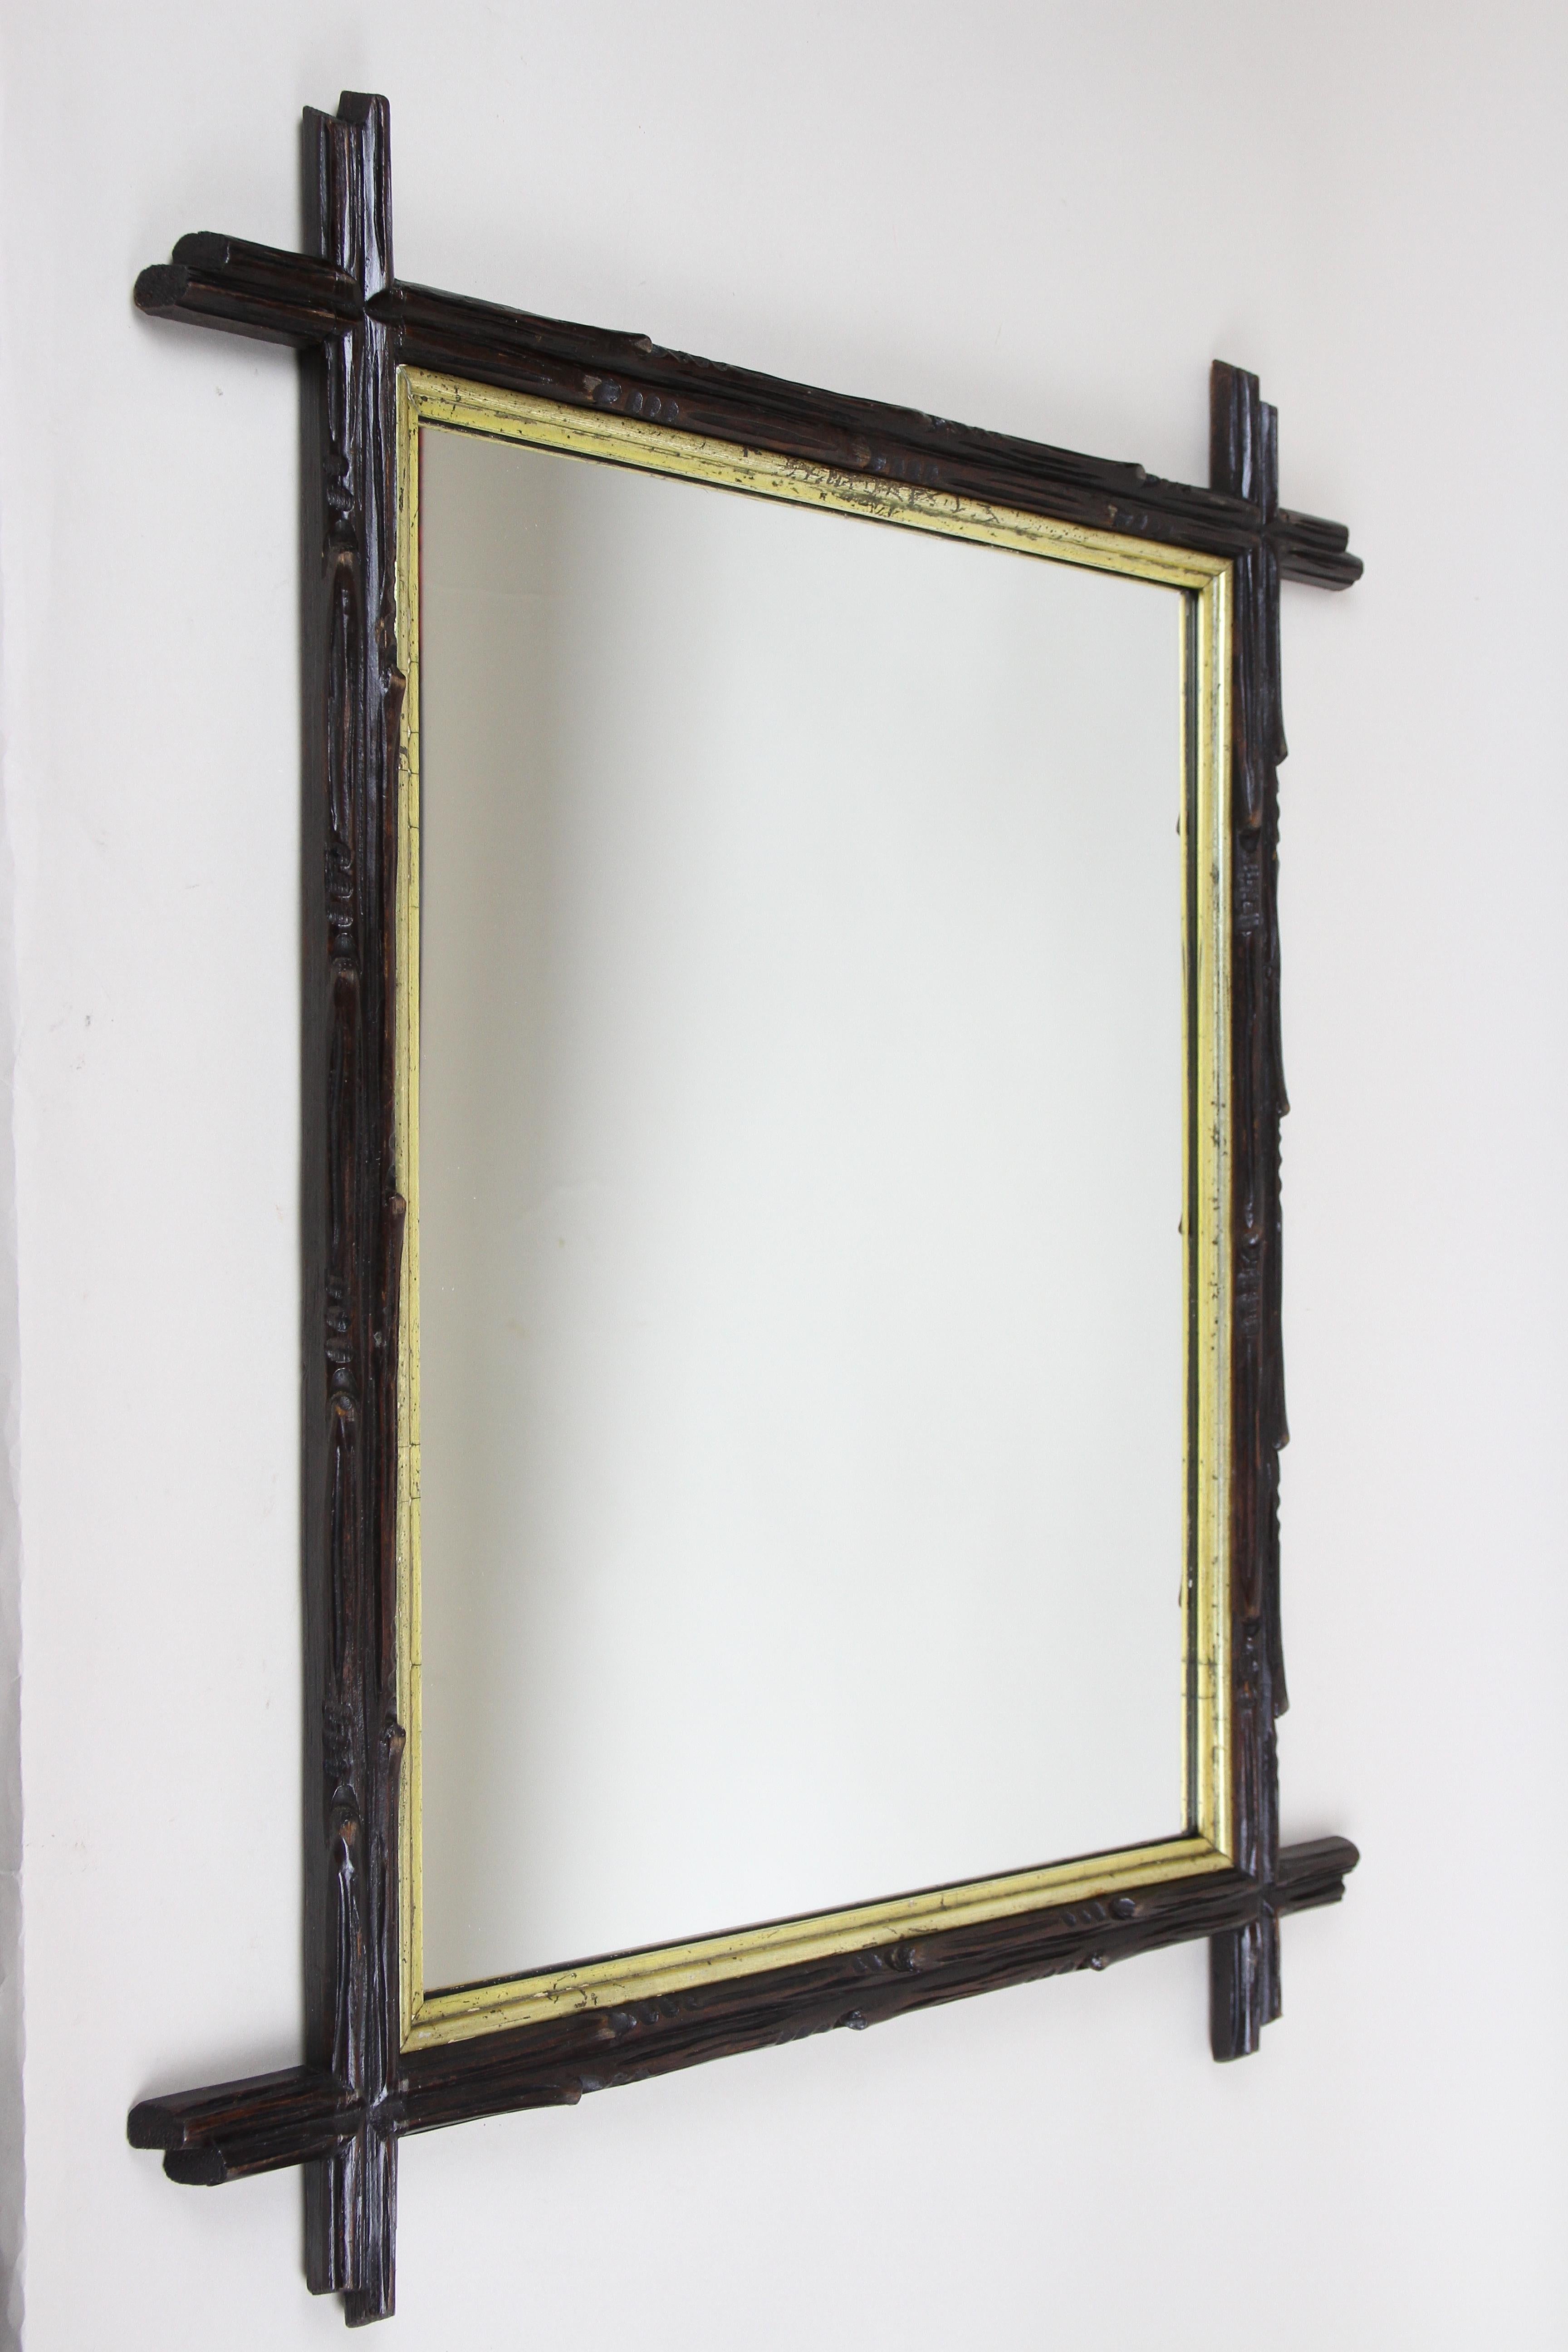 Extraordinary rustic Black Forest wall mirror from the period in Austria around 1880. Elaborately hand carved out of basswood, this fantastic rural mirror impresses with its artfully carved frame in the style of tree branches, slightly protruding